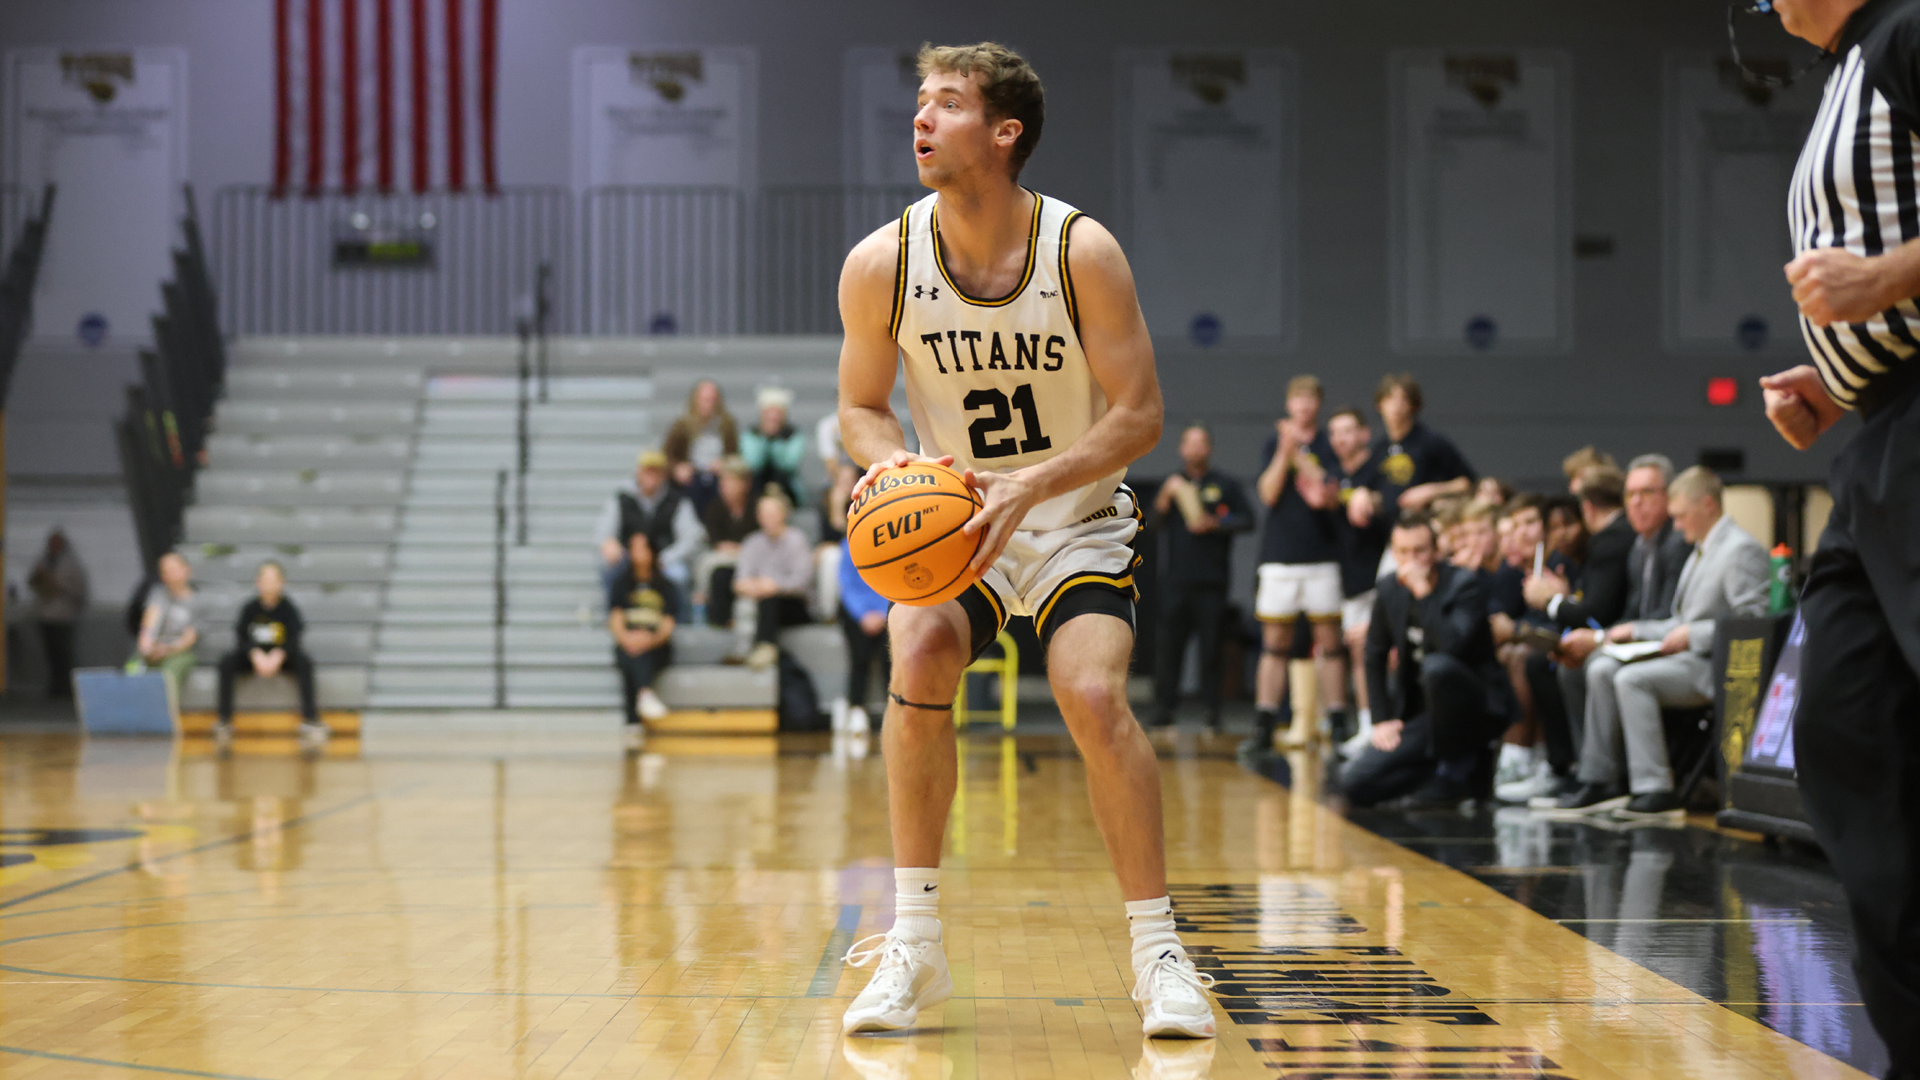 Carter Thomas scored 14 points, going six-of-six from the line in the Titans' loss to Whitman